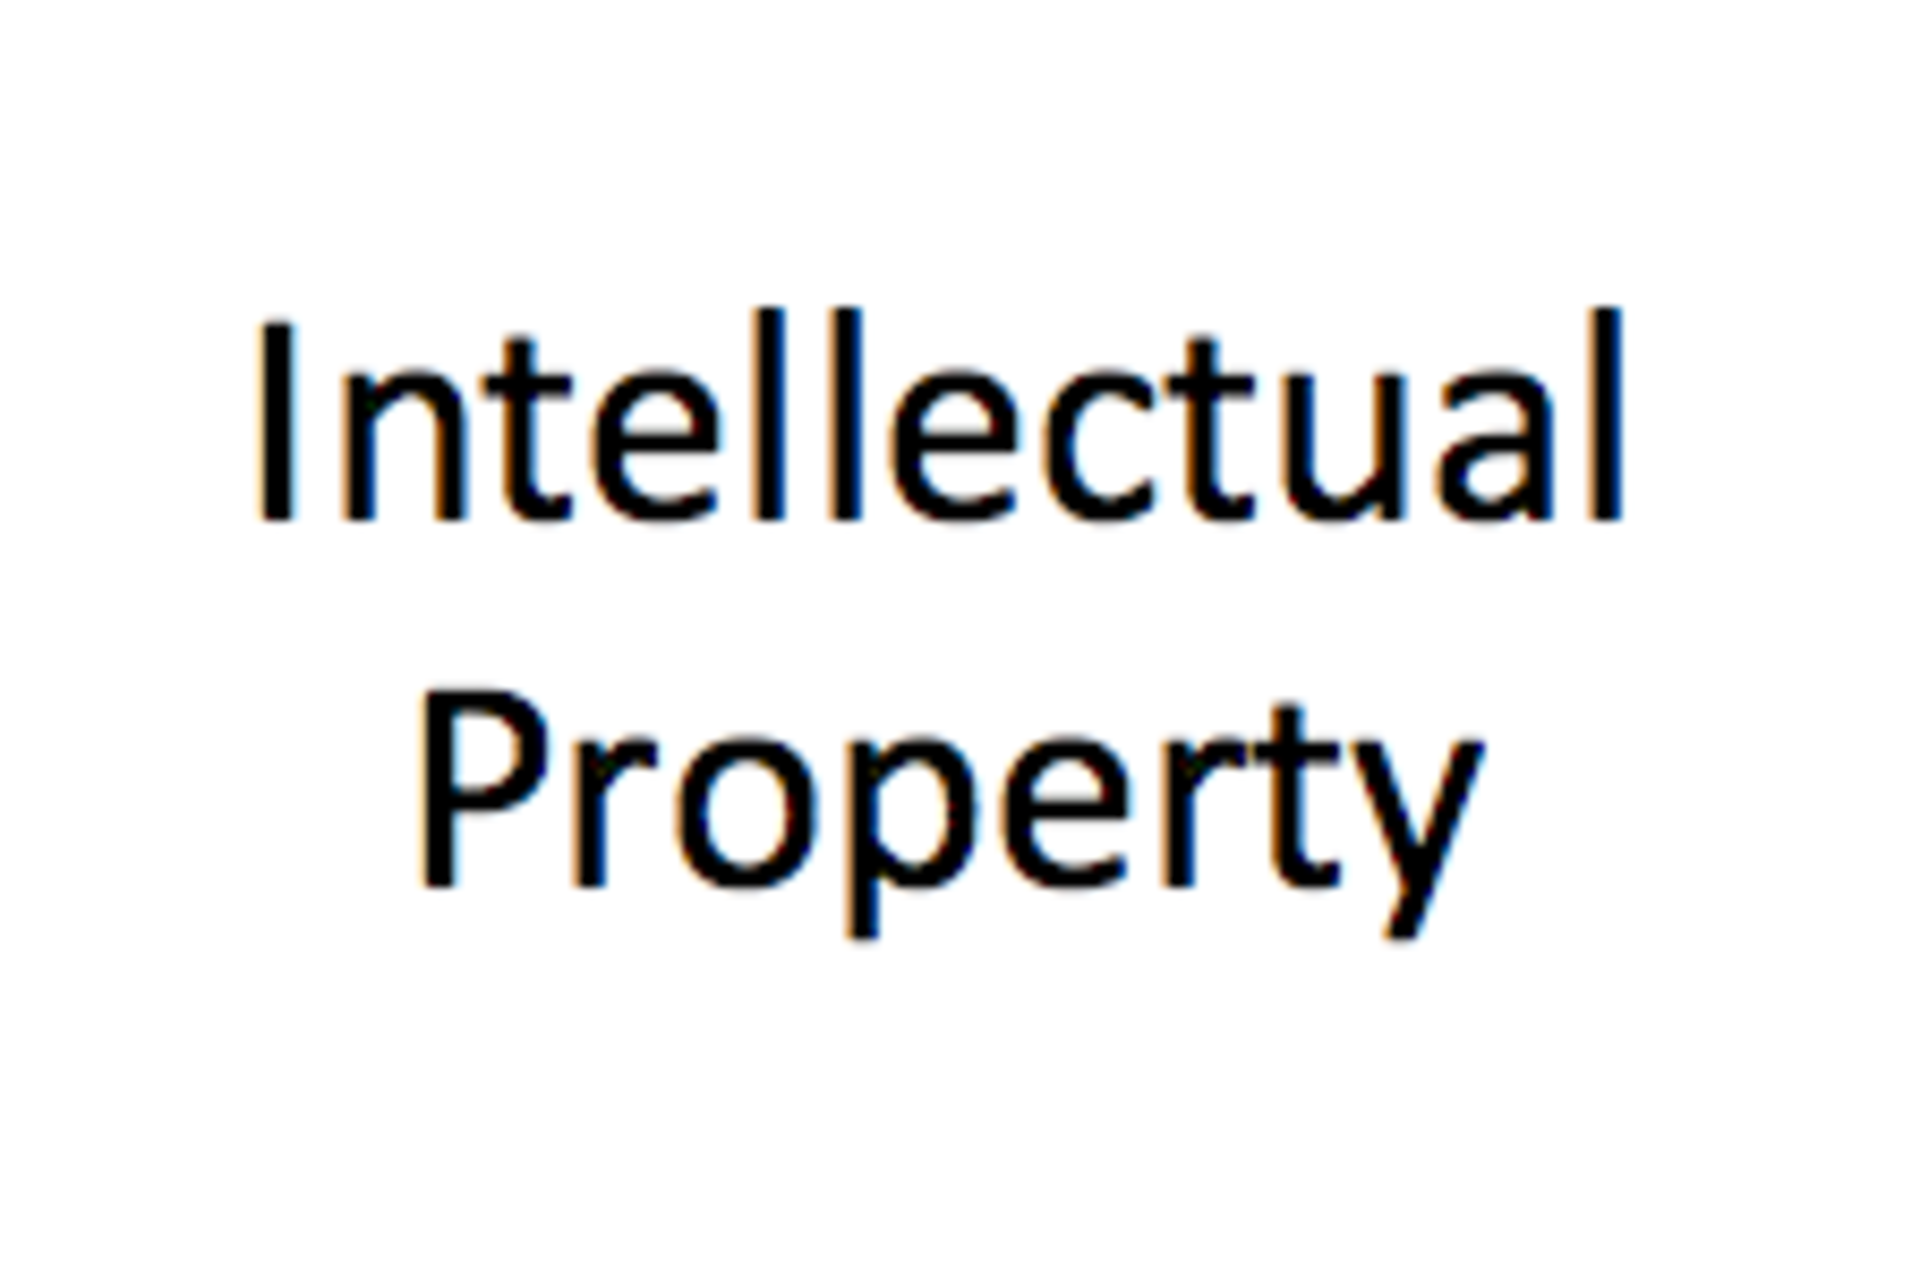 Lot Consisting of all Intellectual Property